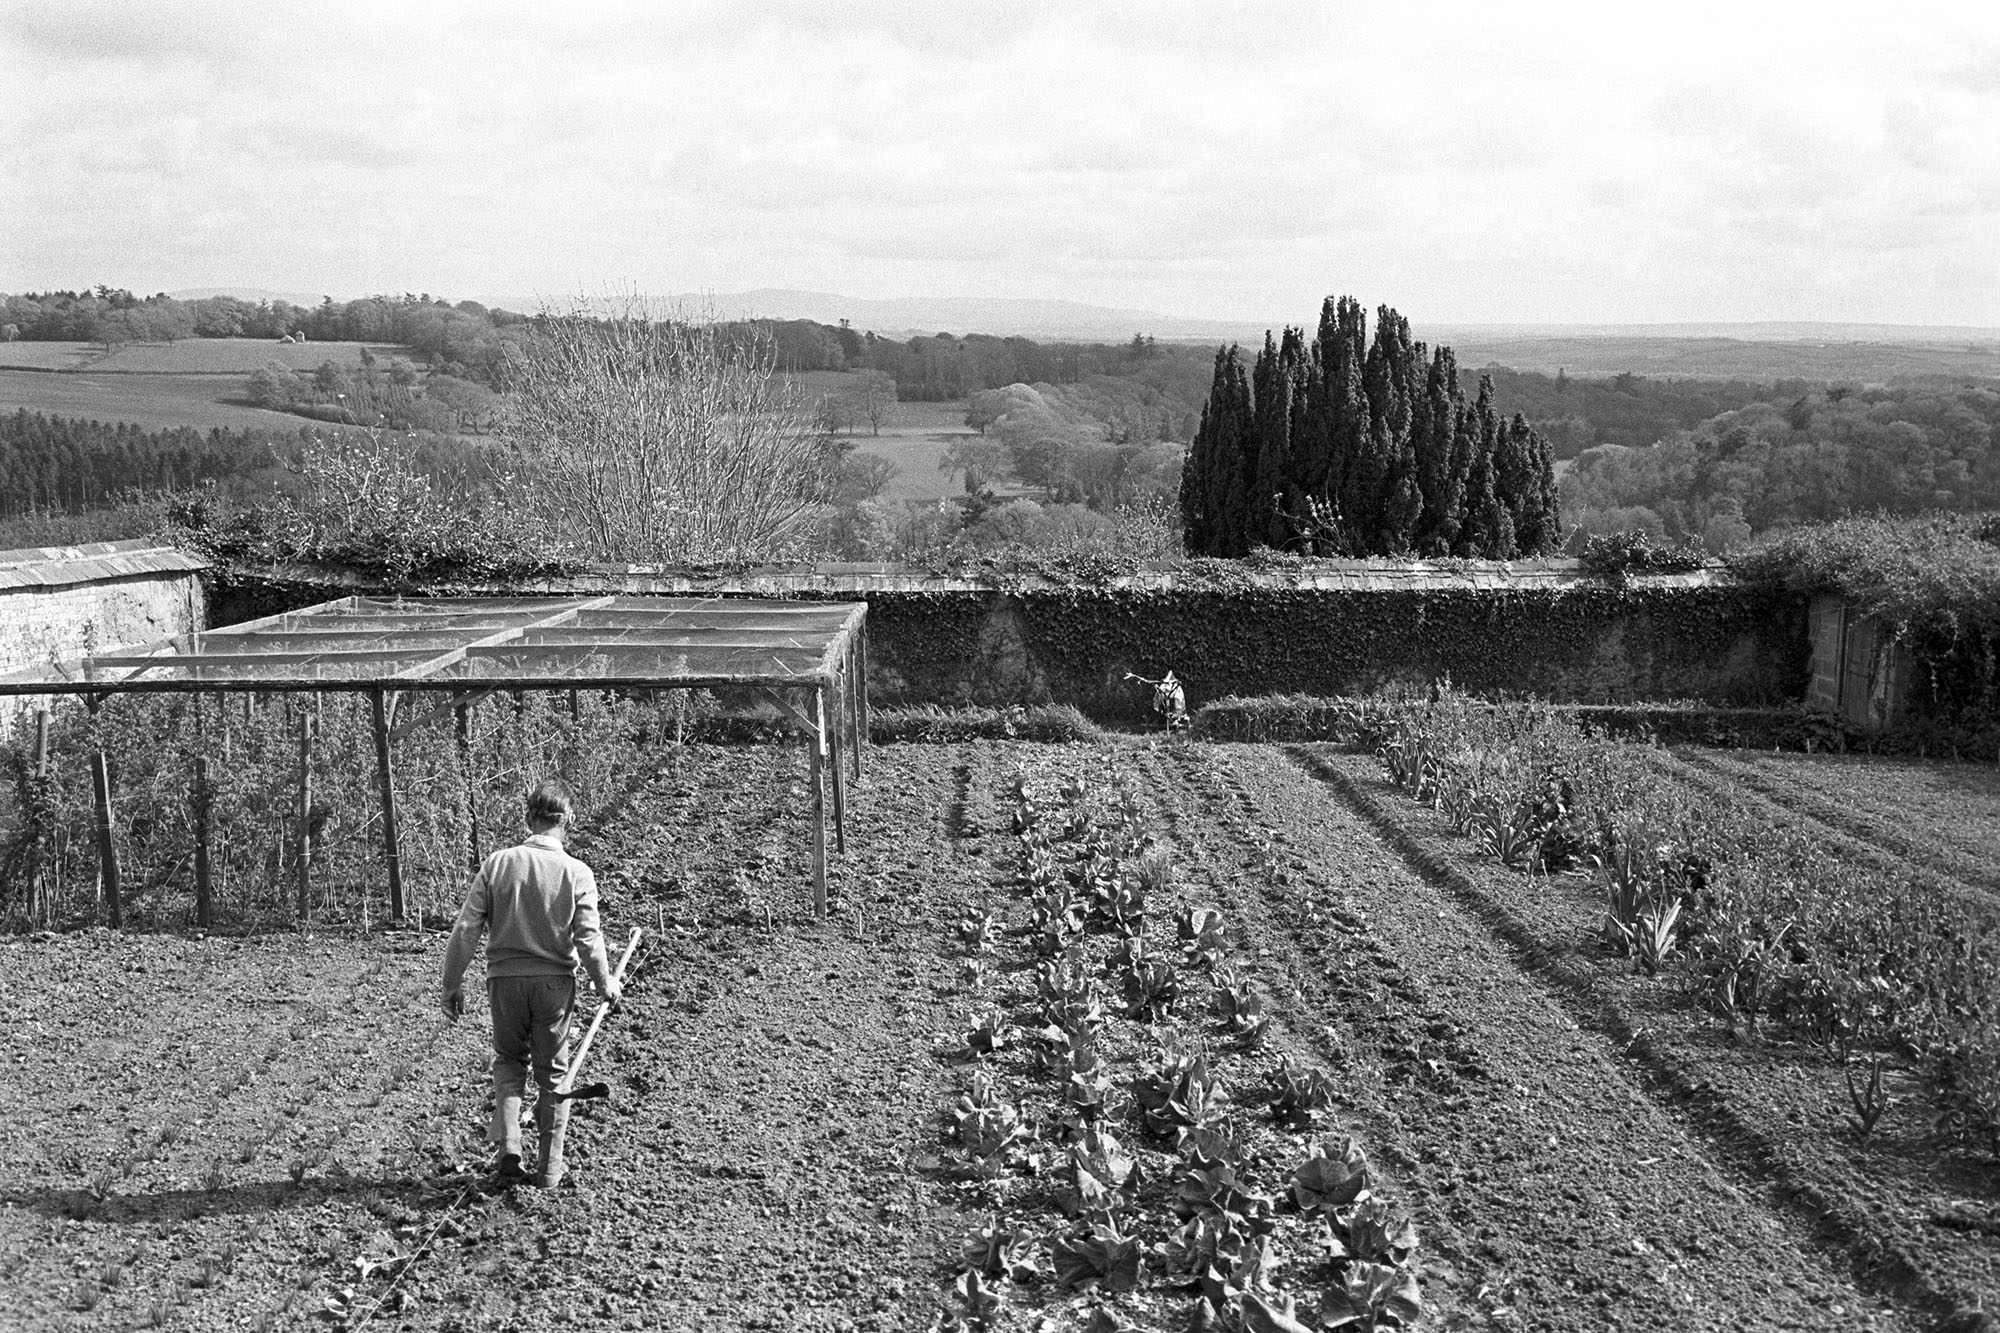 Man planting spring vegetables in walled garden, view of distant hills, Dartmoor. 
[A man walking through a walled kitchen garden at The Old Rectory, Merton, holding a hoe. He is planting spring vegetables. Rows of vegetables and a fruit cage can be seen and Dartmoor is visible in the distance.]